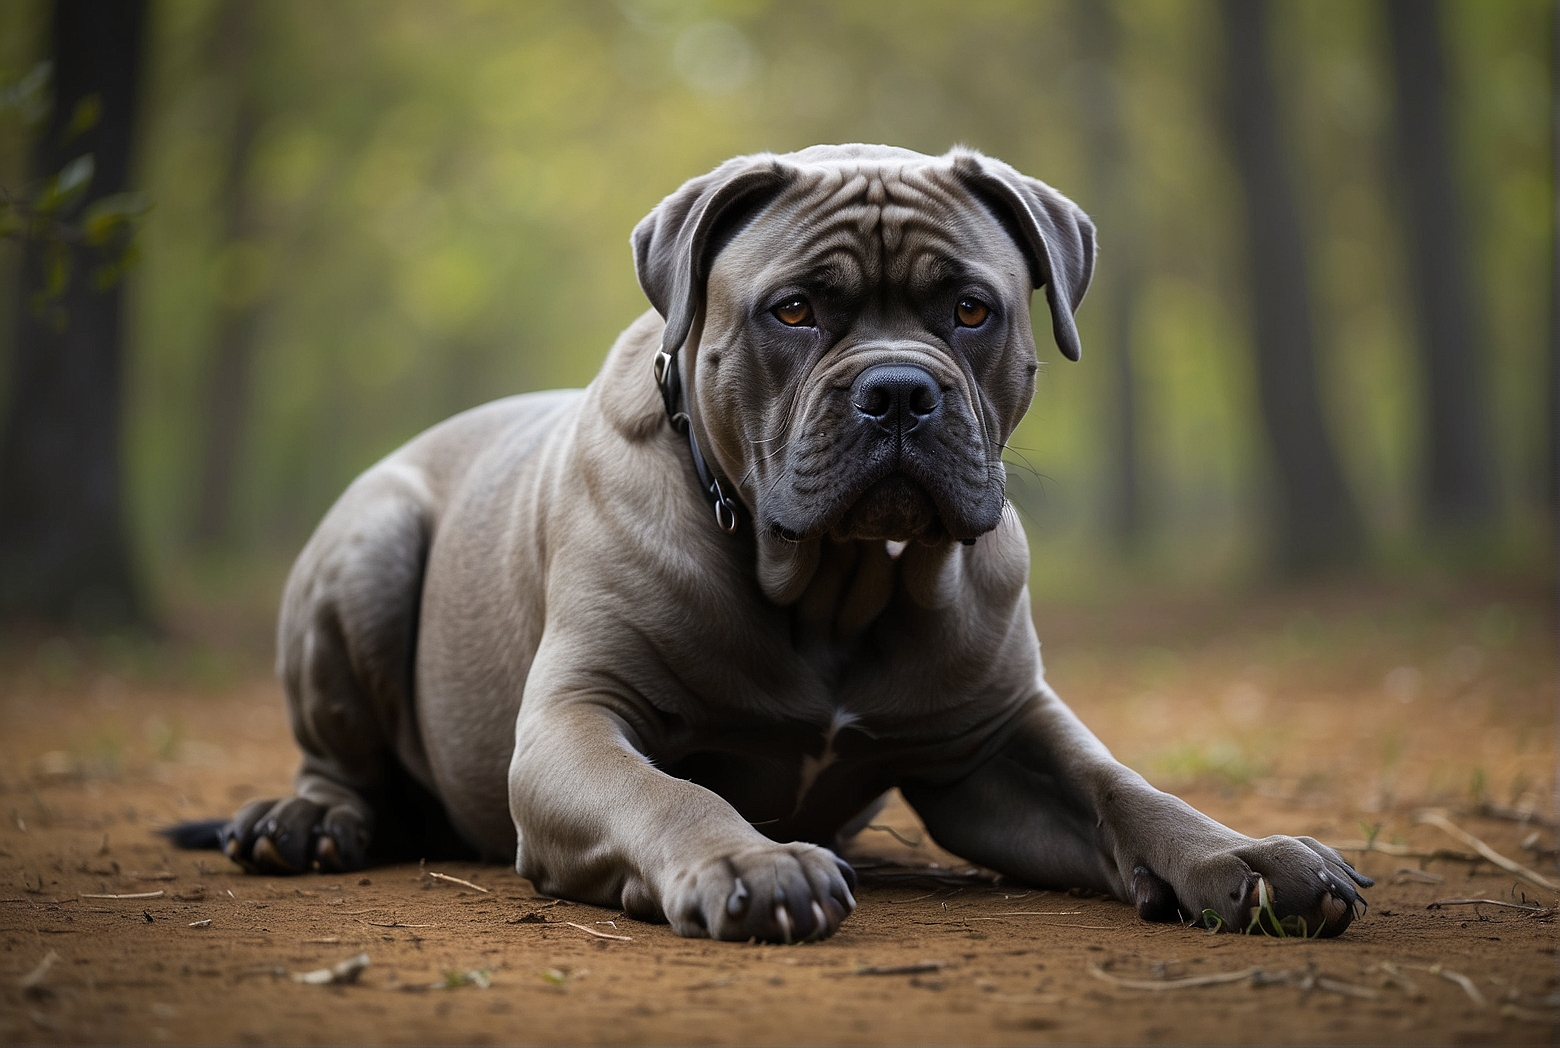 Top 5 Strongest Dog Breeds Compared to the Cane Corso